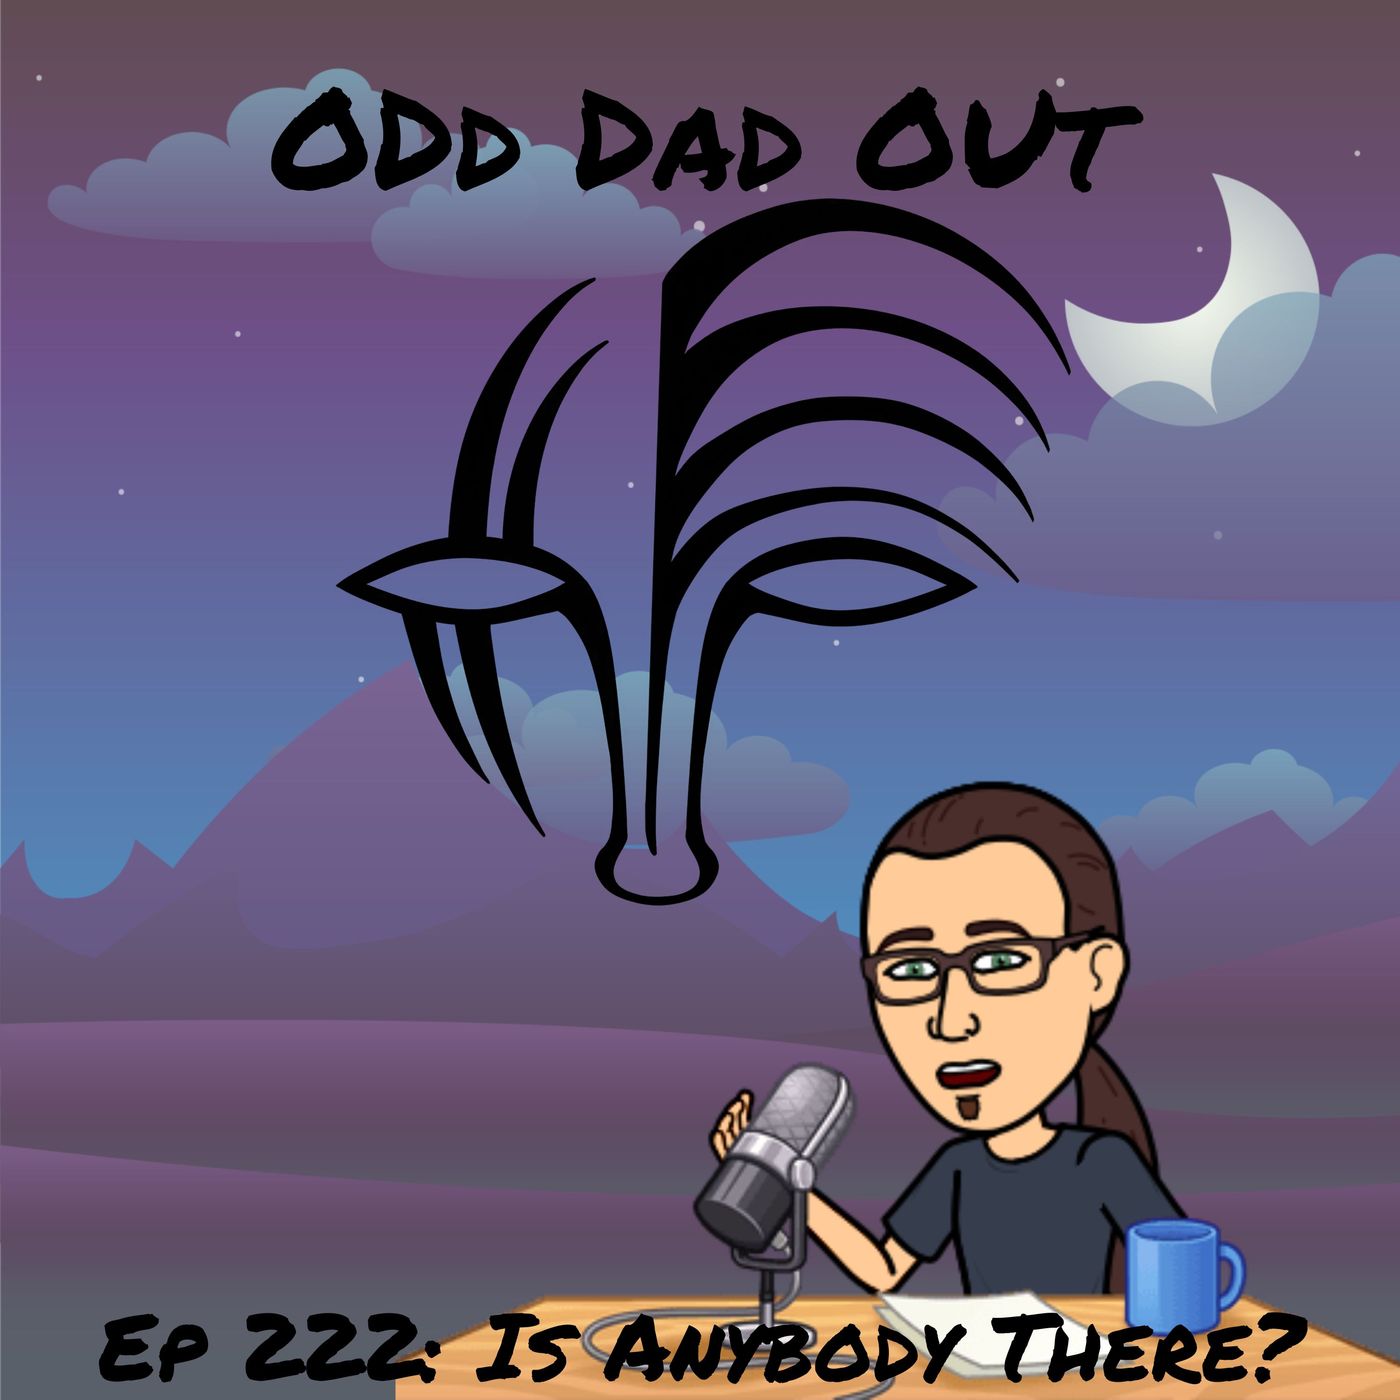 Is Anybody There? : ODO 222